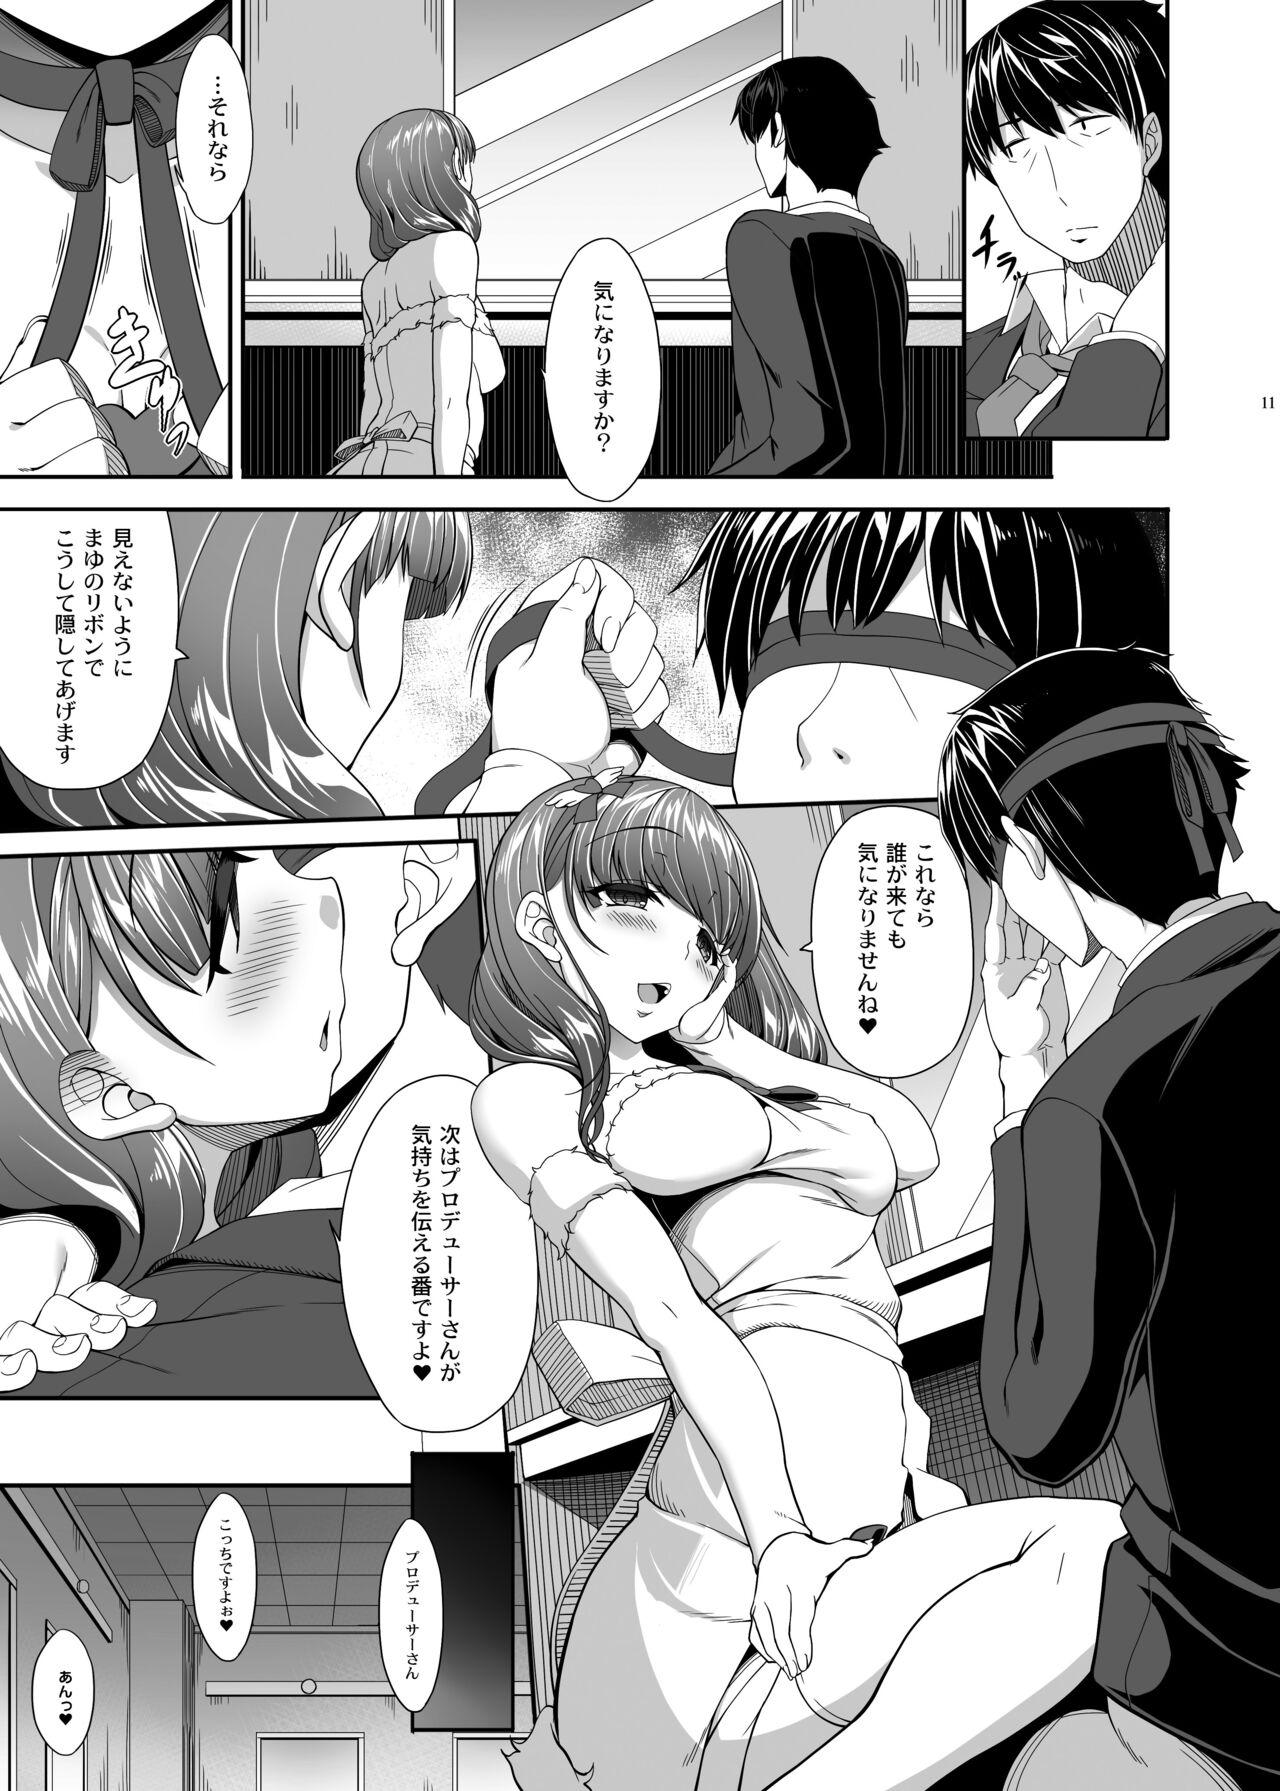 Ghetto Room of a secret for us - The idolmaster Camporn - Page 10